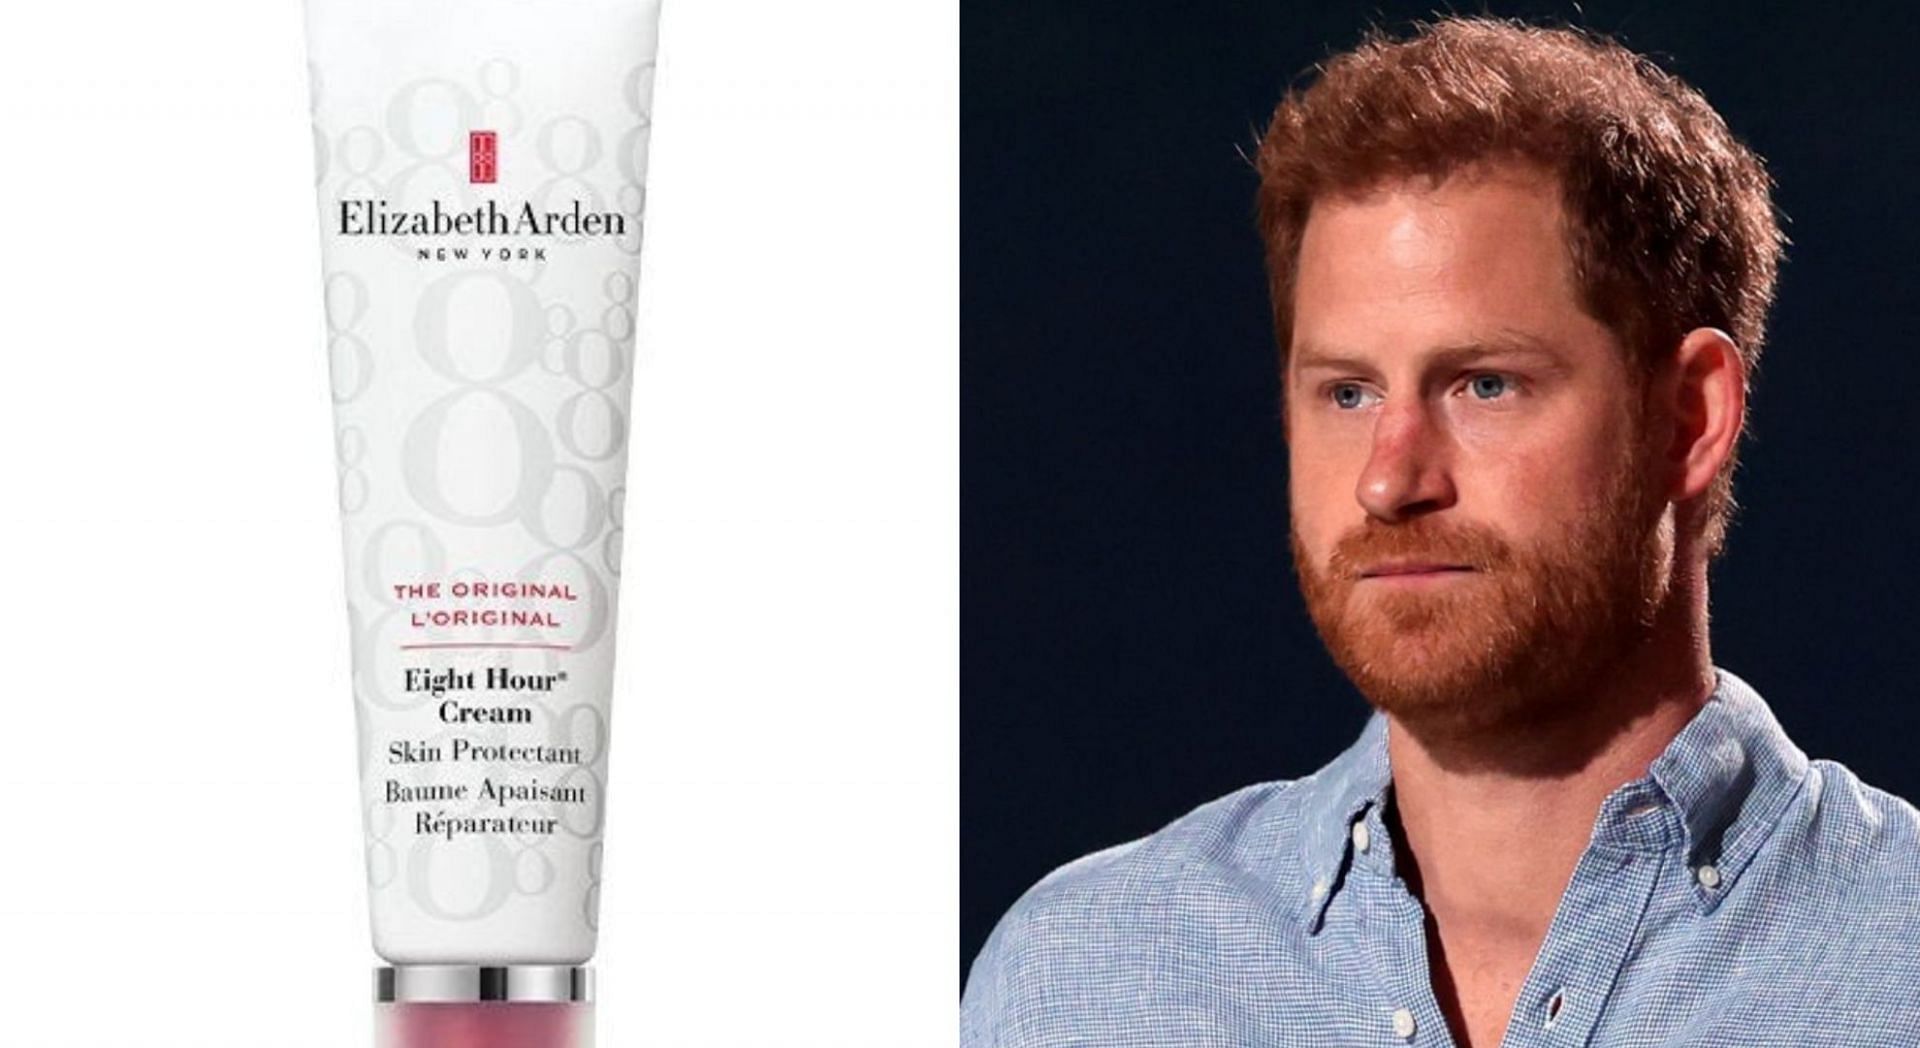 Prince Harry said Elizabeth Arden Eight Hour Cream helped him with frostbite (Image via BootsUK/Twitter and Getty Images)